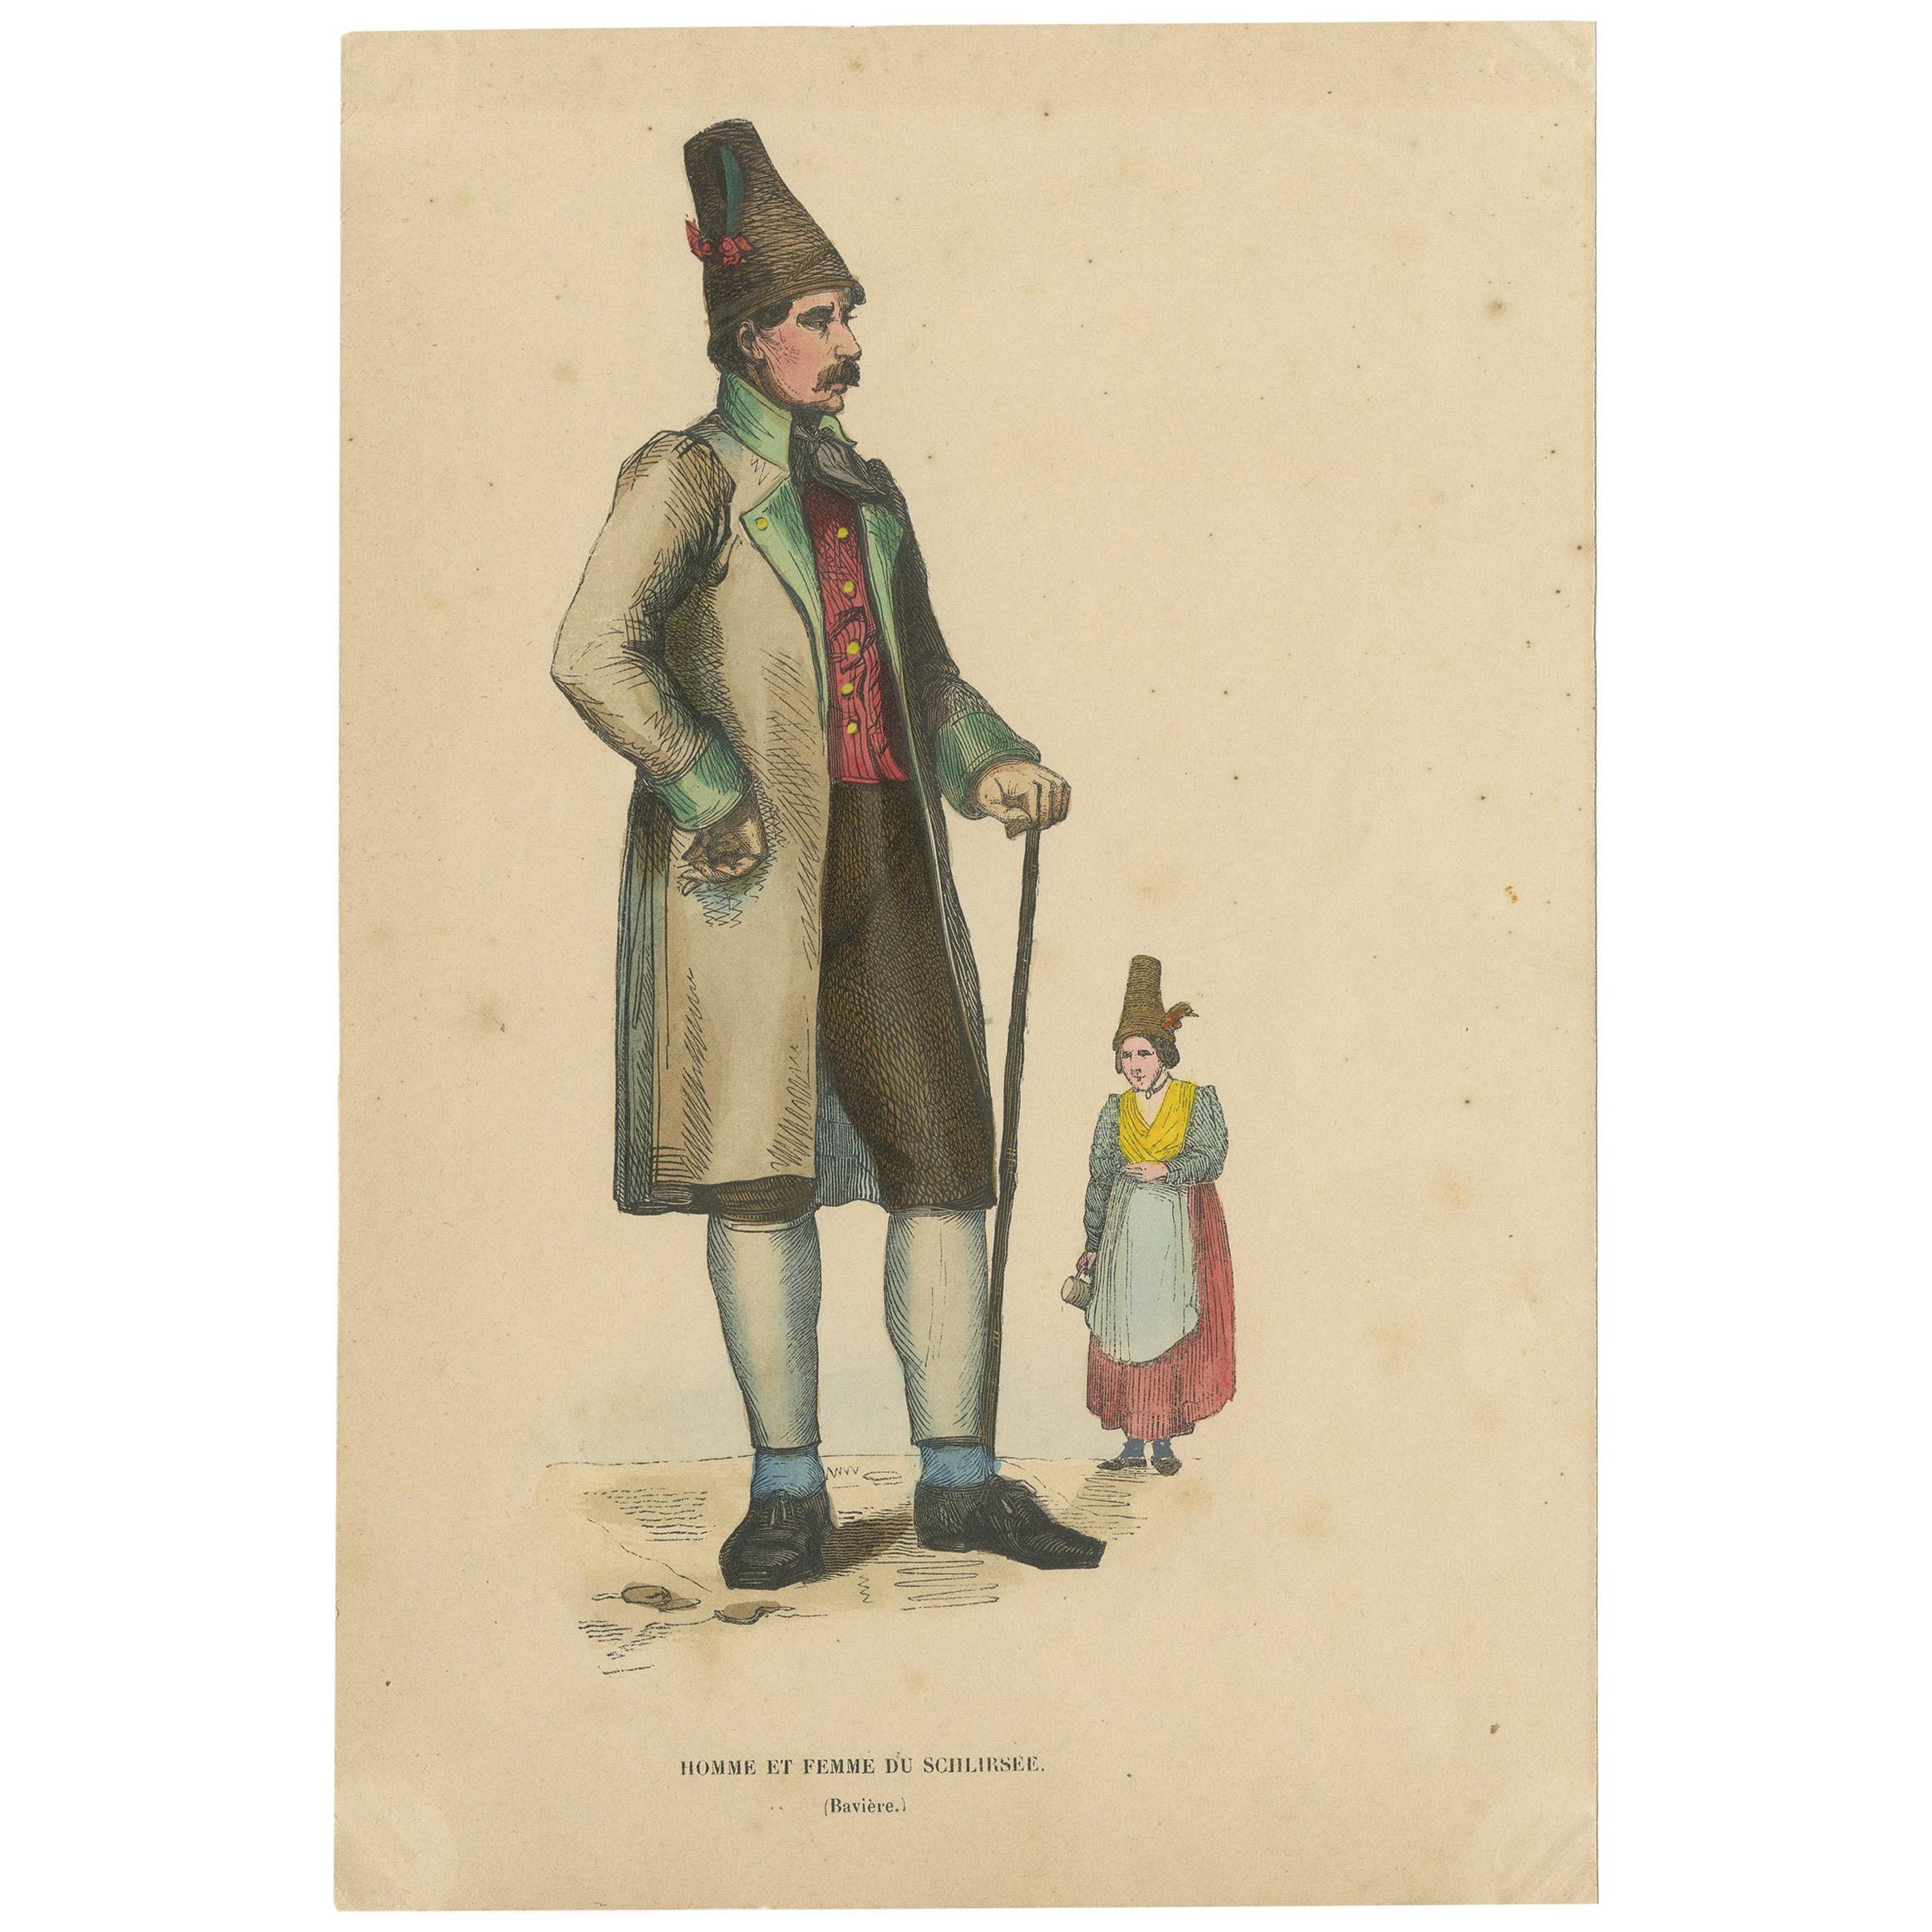 Antique Costume Print of Figures from Schliersee by Wahlen, 1843